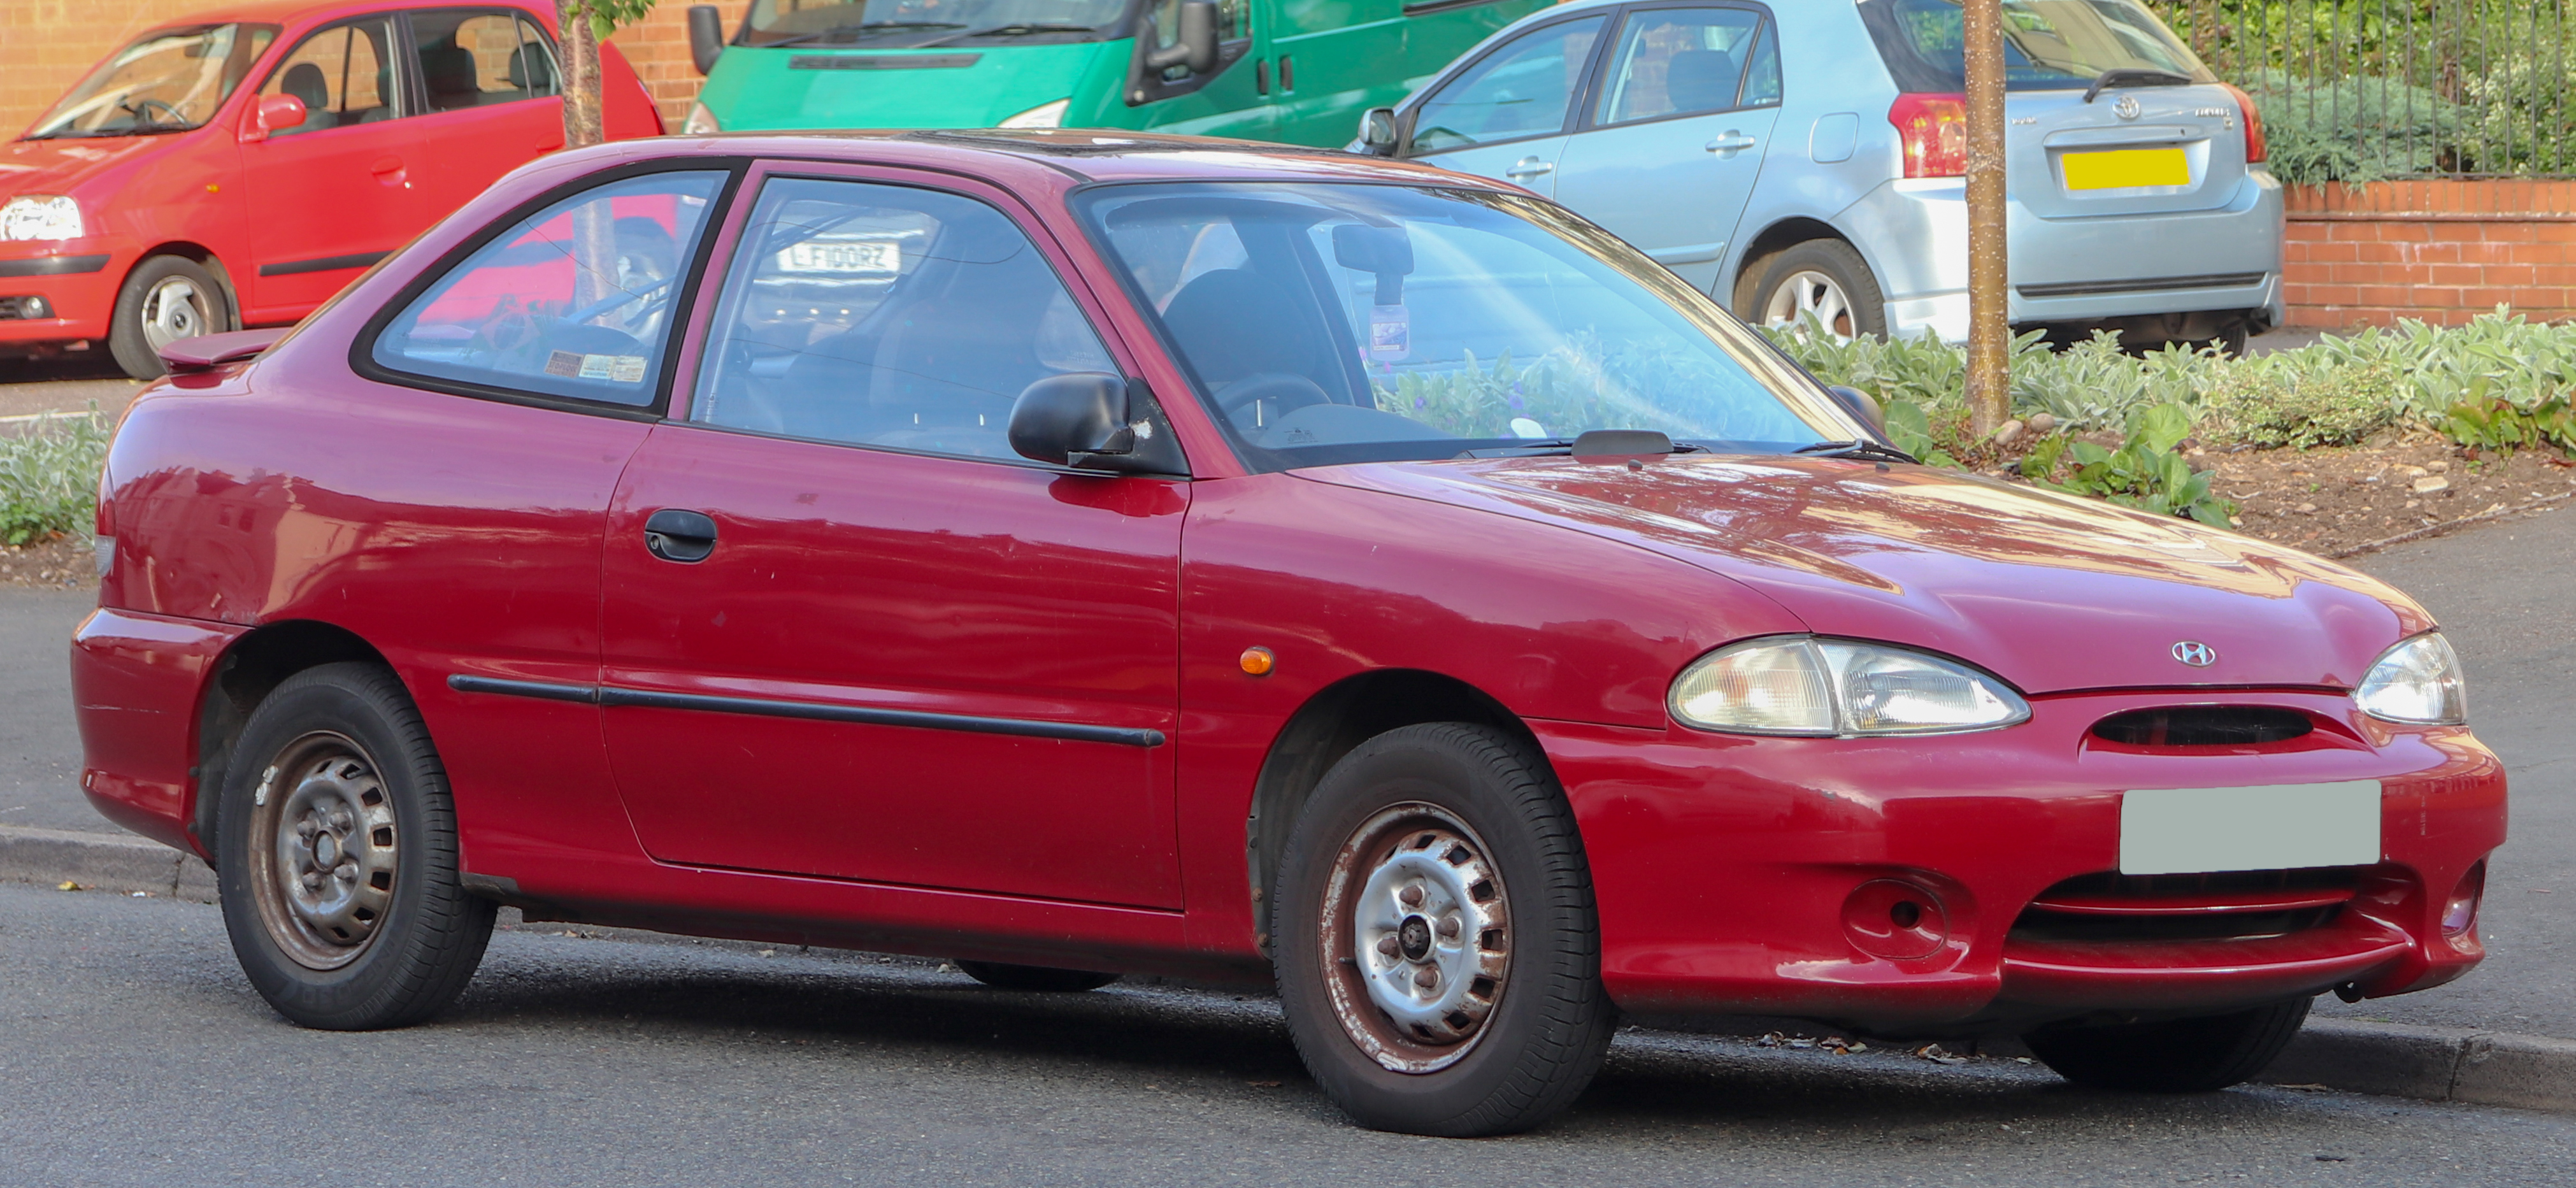 File:1997 Hyundai Accent Coupe 1.3 Front.jpg - Wikimedia Commons